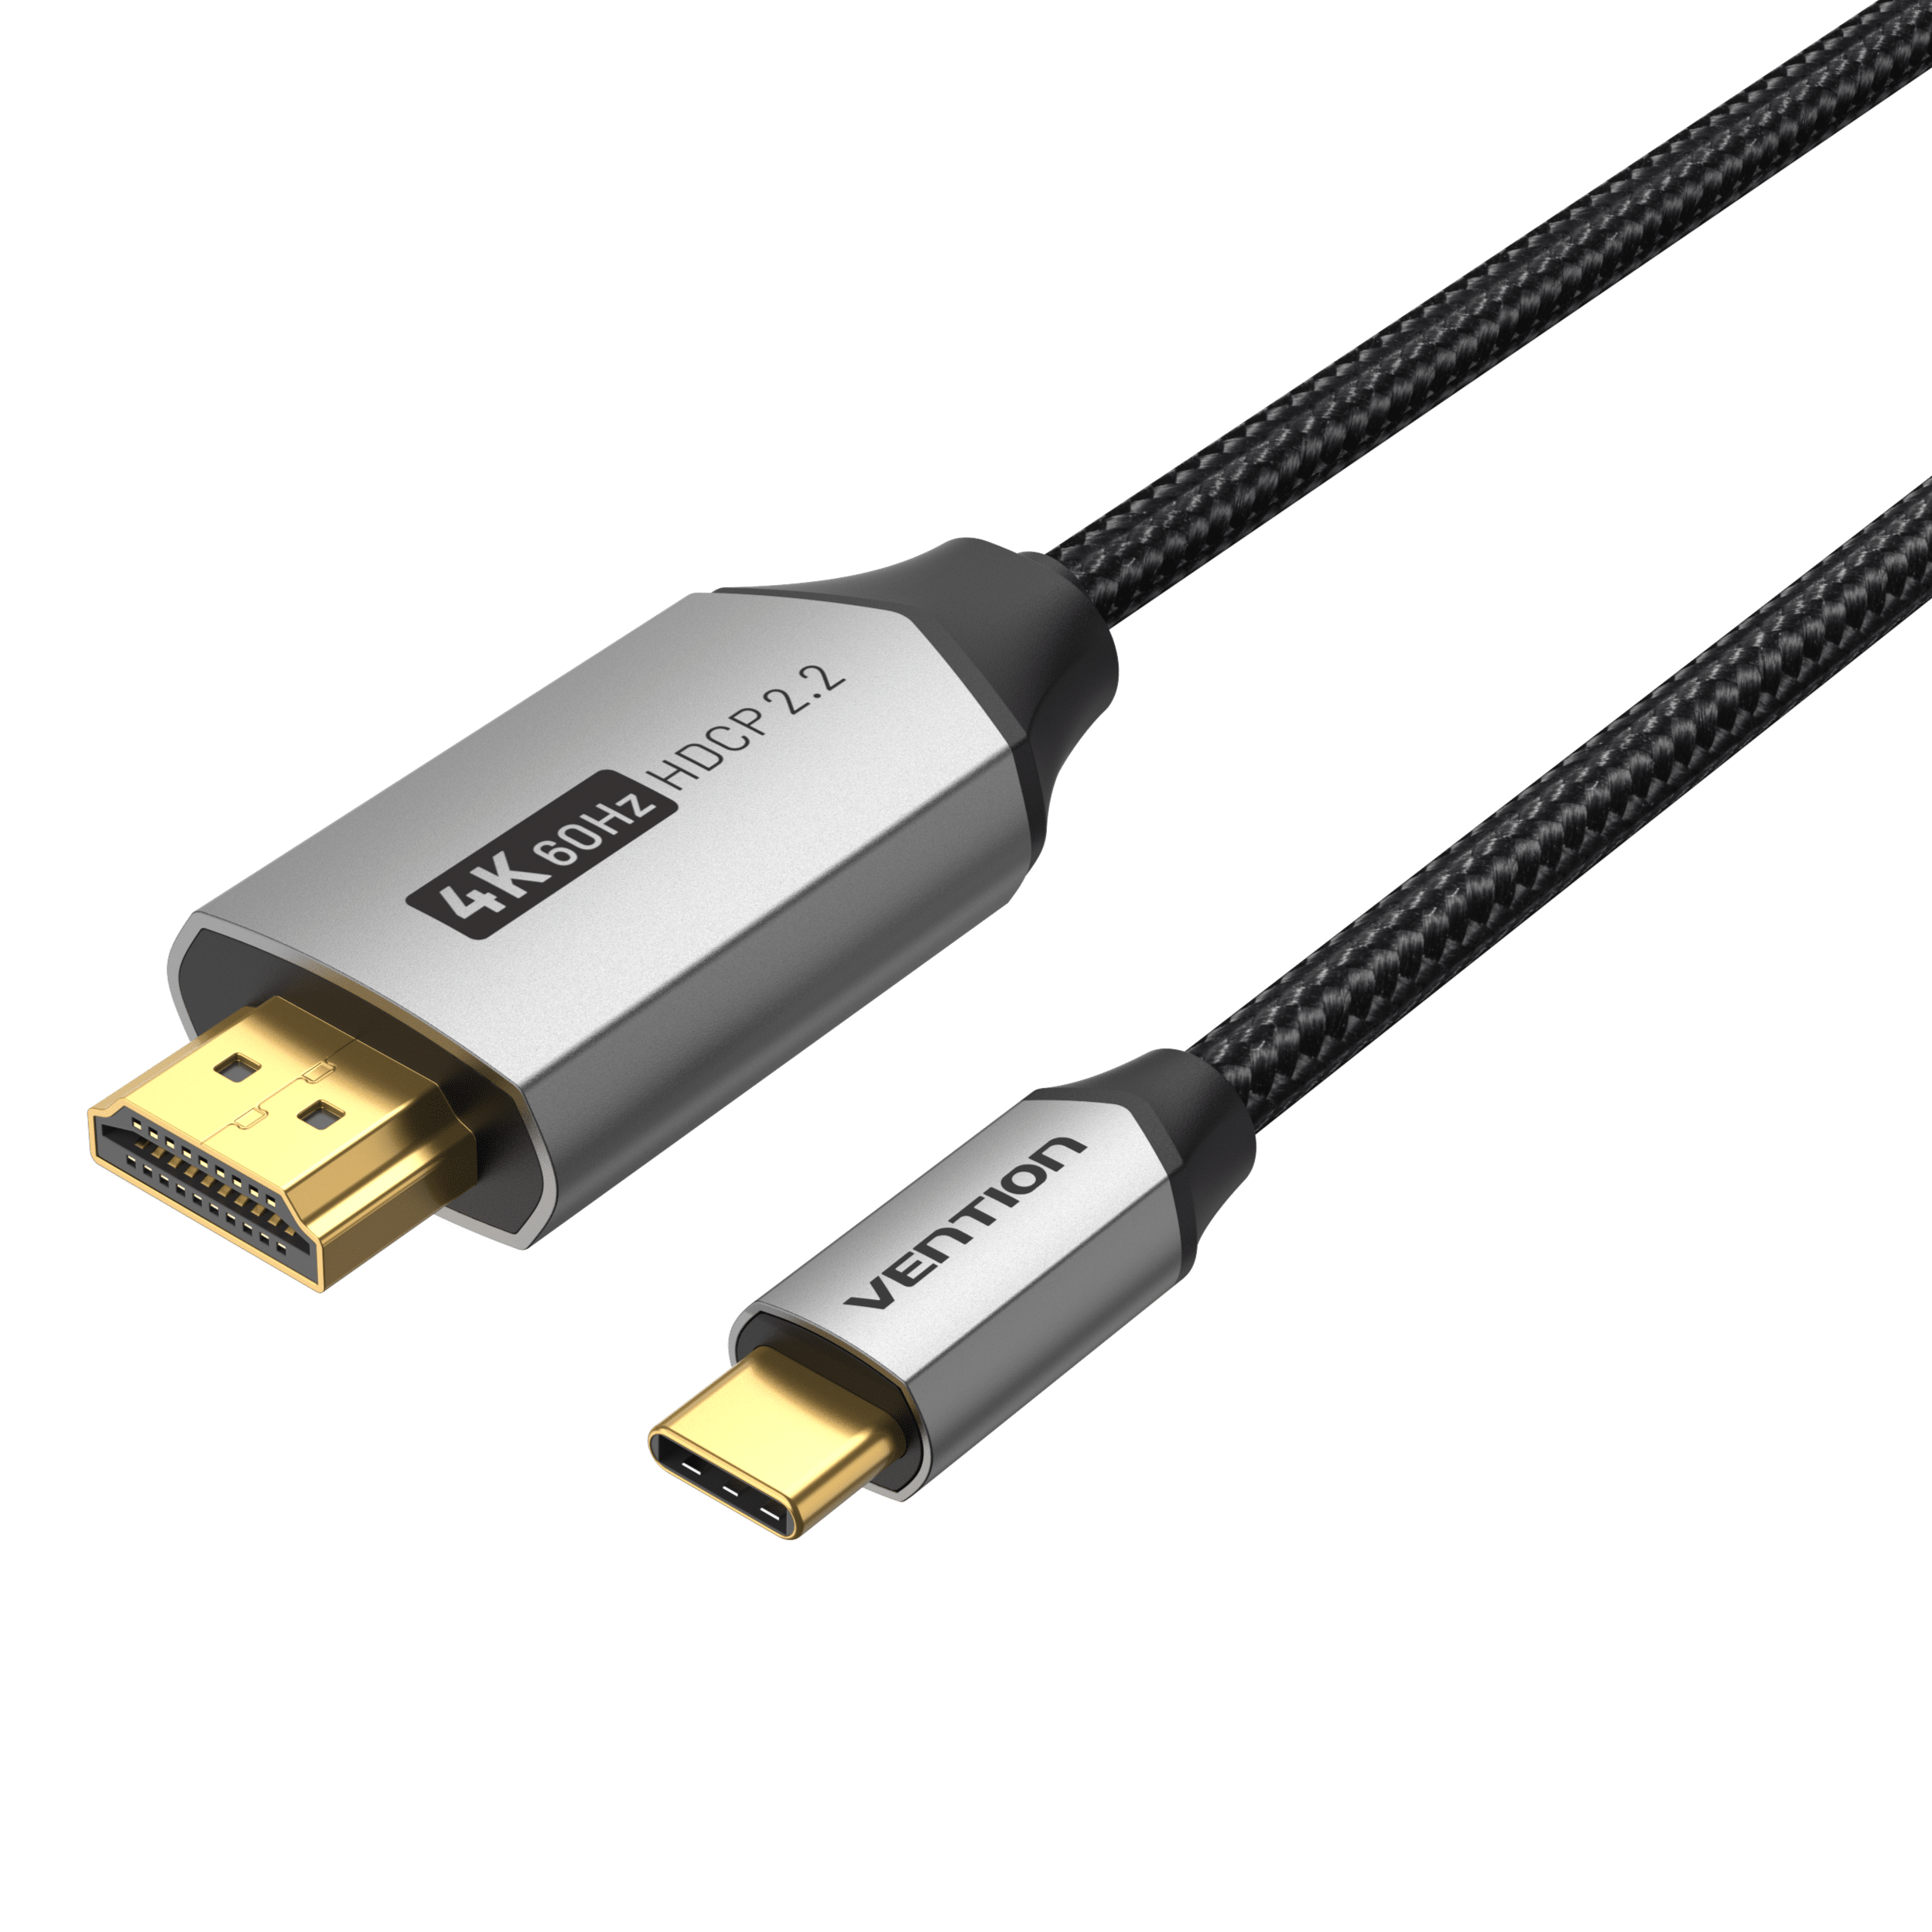 Cable USB-C a HDMI 4K